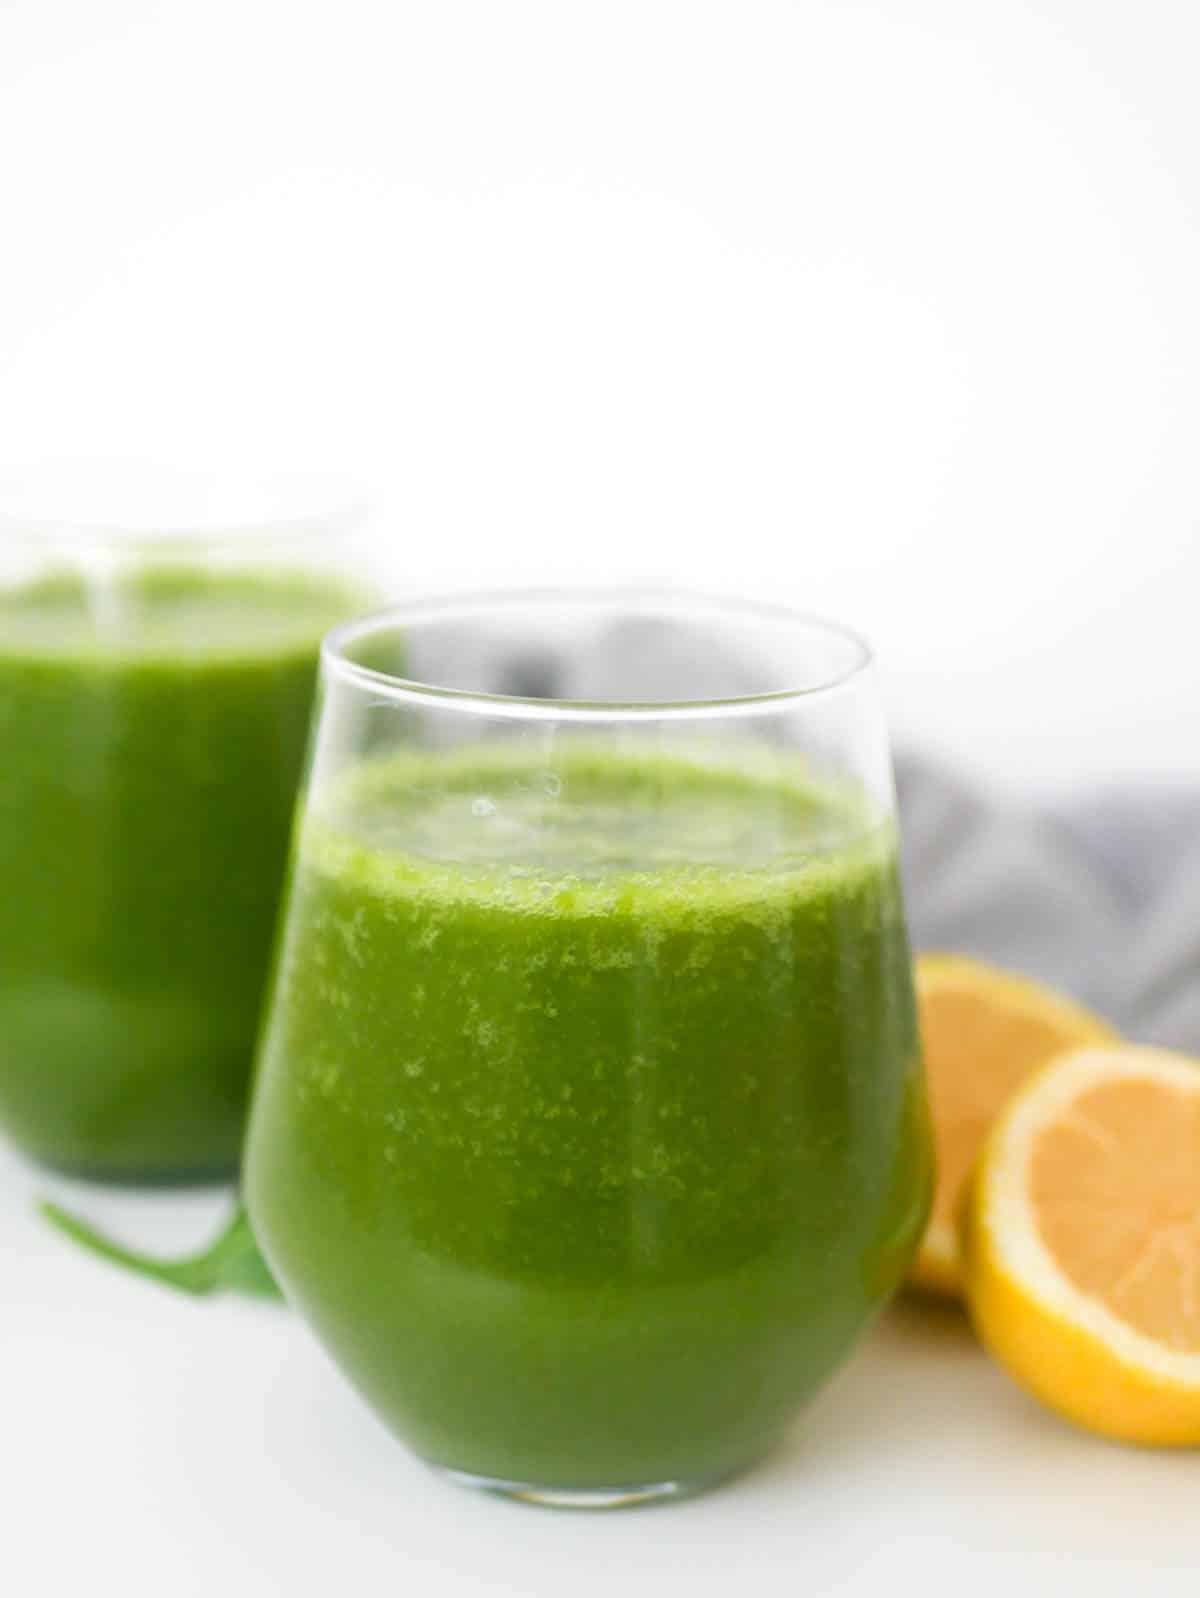 Apple spinach smoothie with lemon in a glass